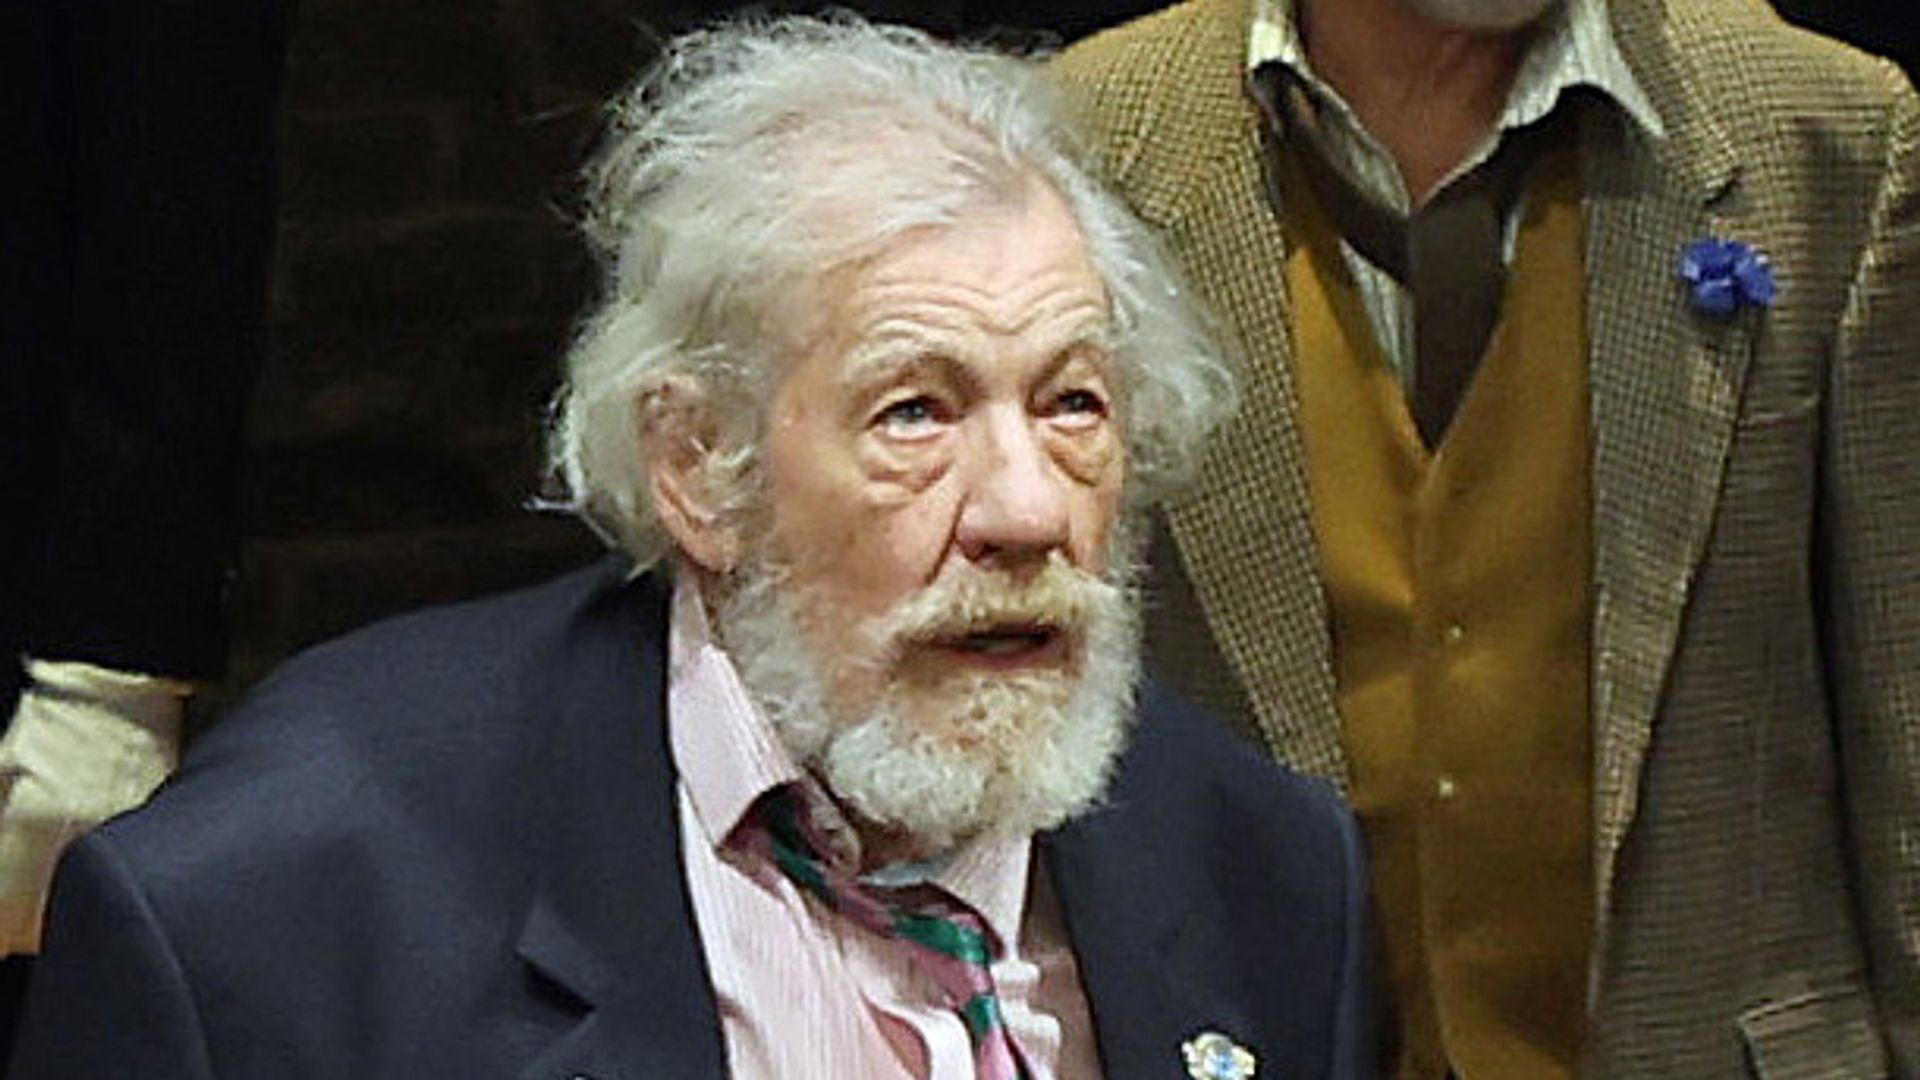 Ian McKellen on stage during the Player Kings